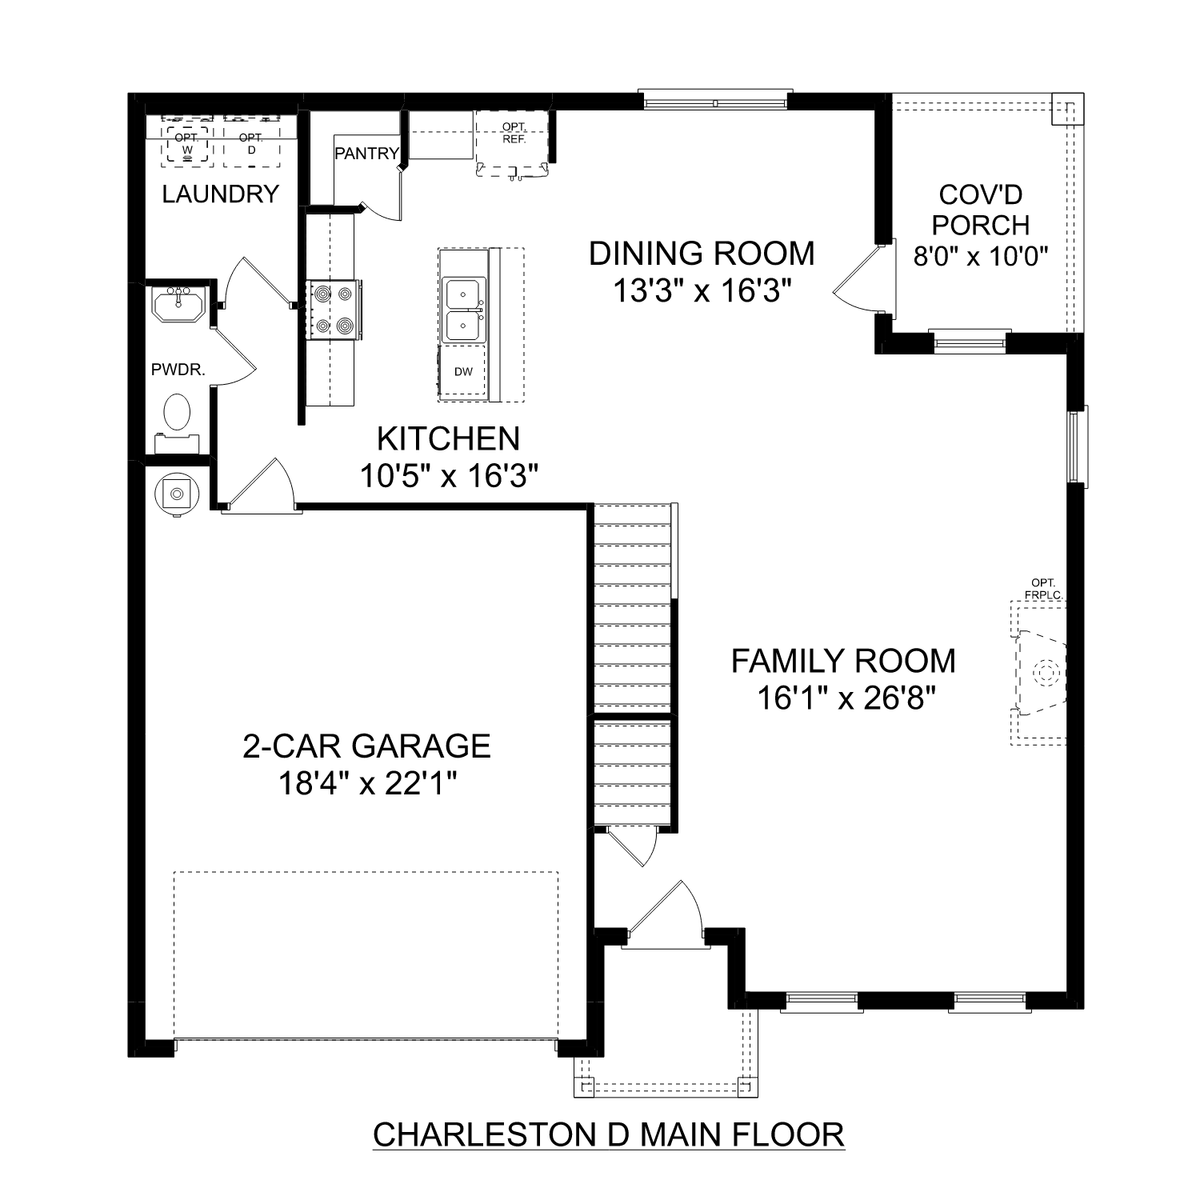 1 - The Charleston D buildable floor plan layout in Davidson Homes' Wood Trail community.